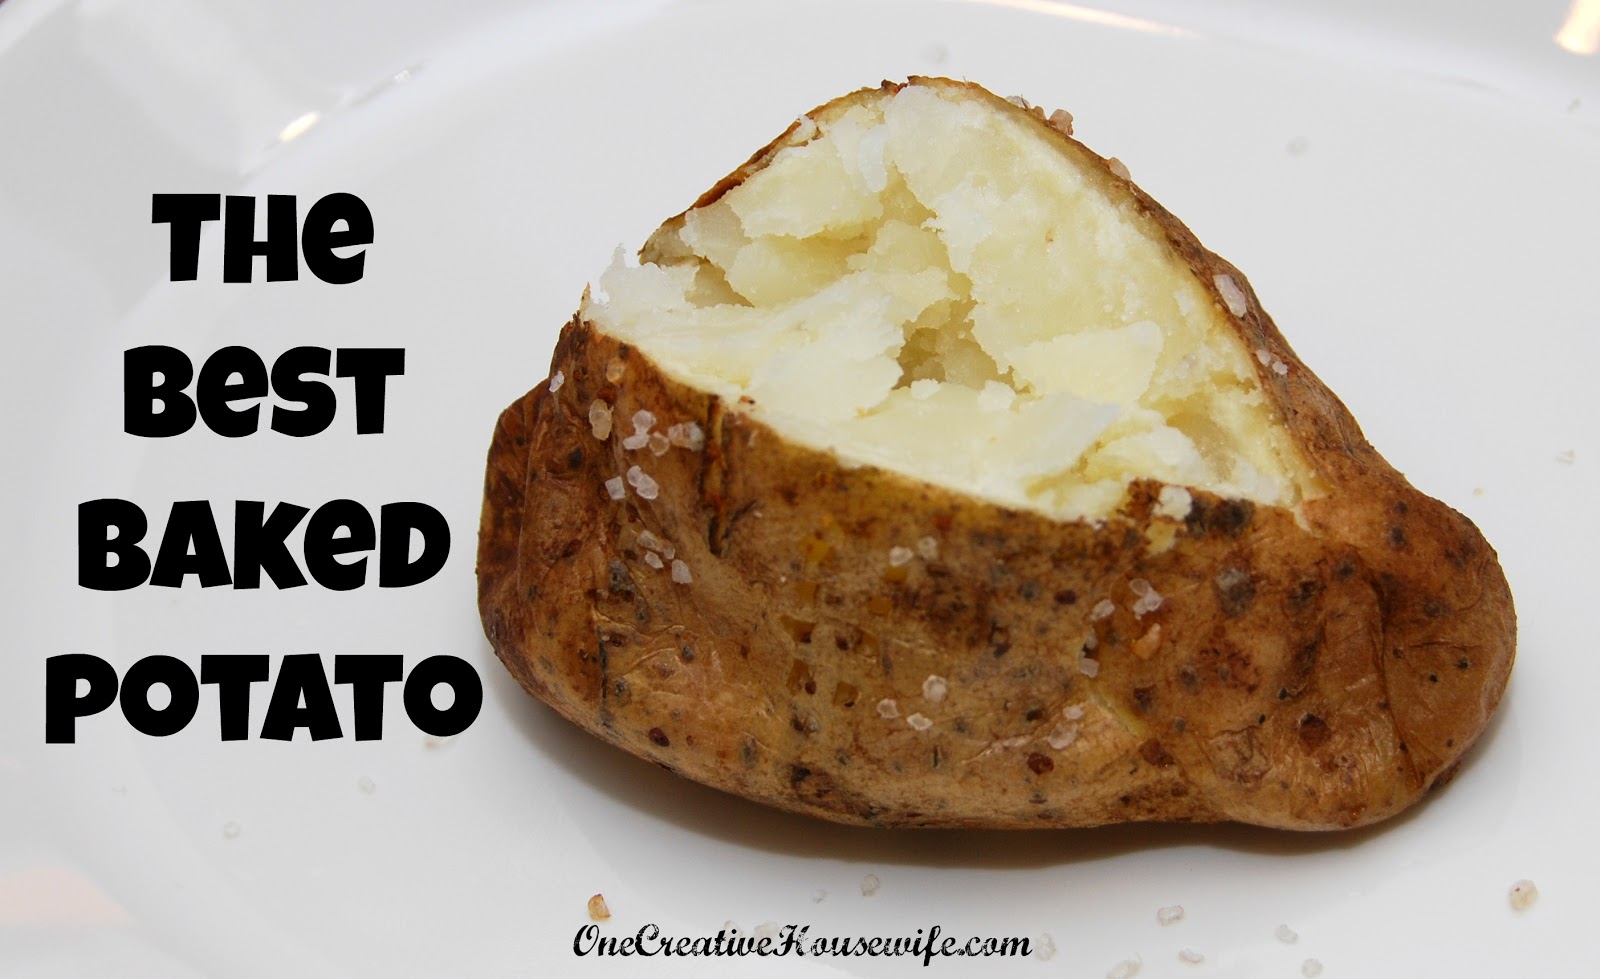 One Creative Housewife: The Best Baked Potato